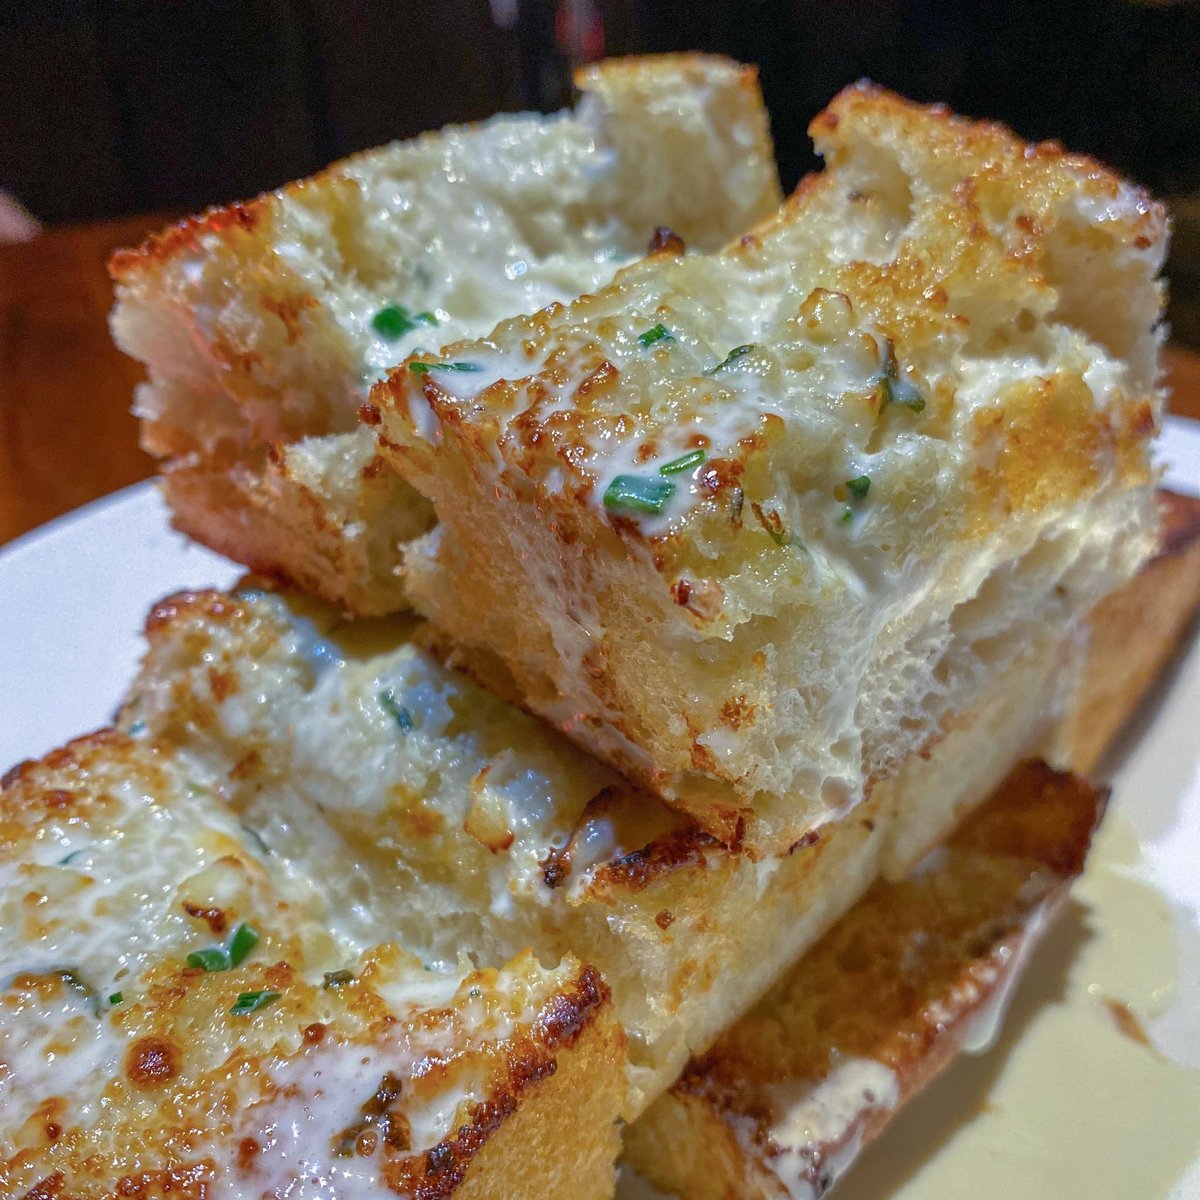 RT @ilaniresort: Prepare to be amazed by the delectable delight that is Michael Jordan's Blue Cheese Garlic Bread. https://t.co/L0WGlZWFfE